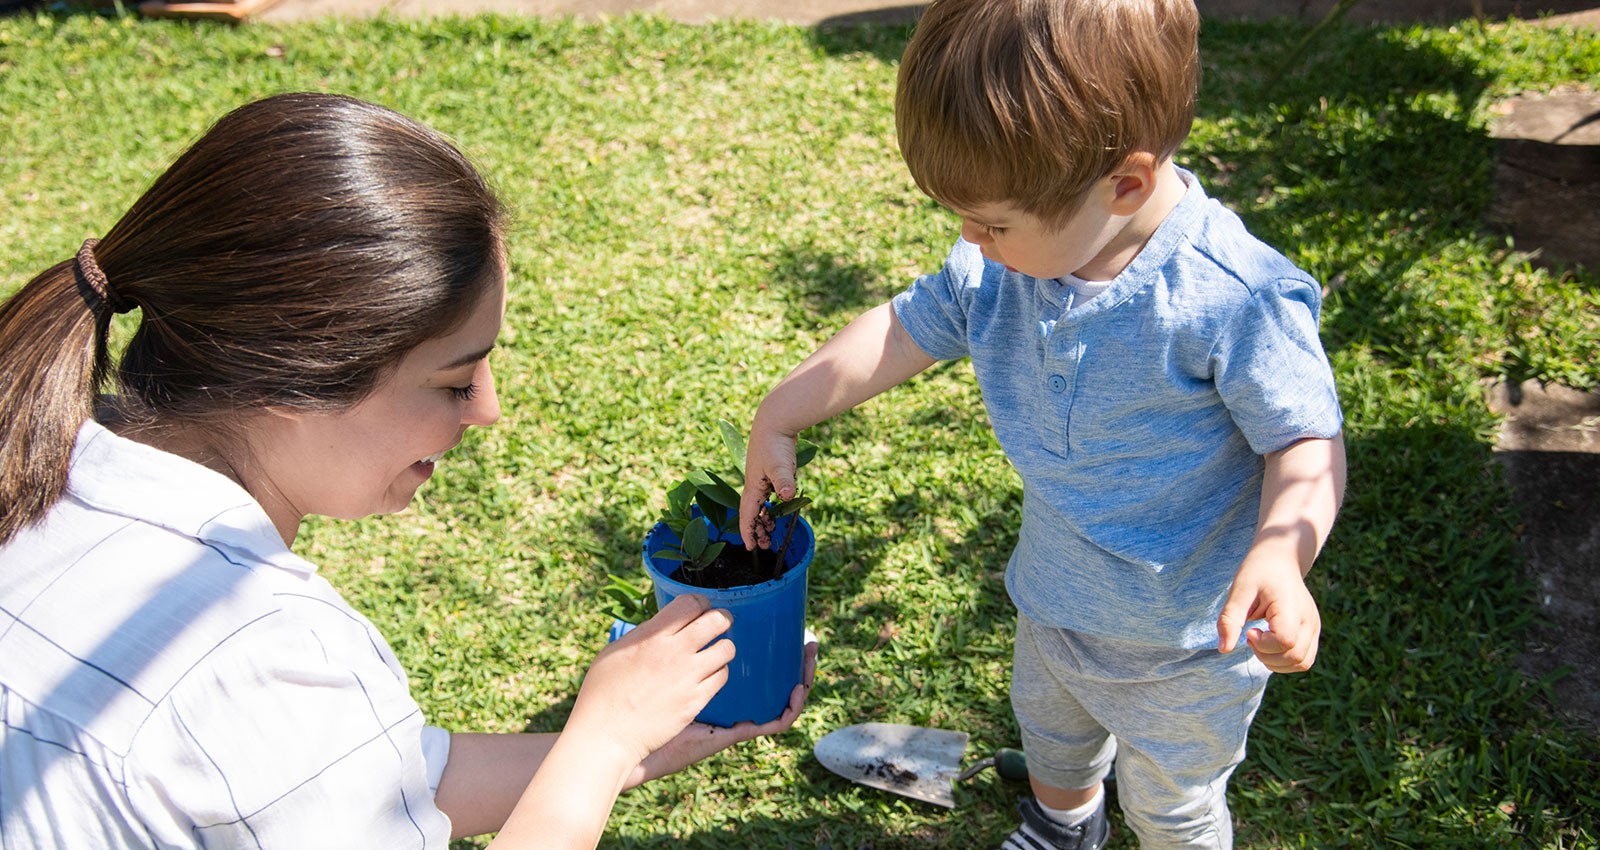 Child playing gardening with a woman